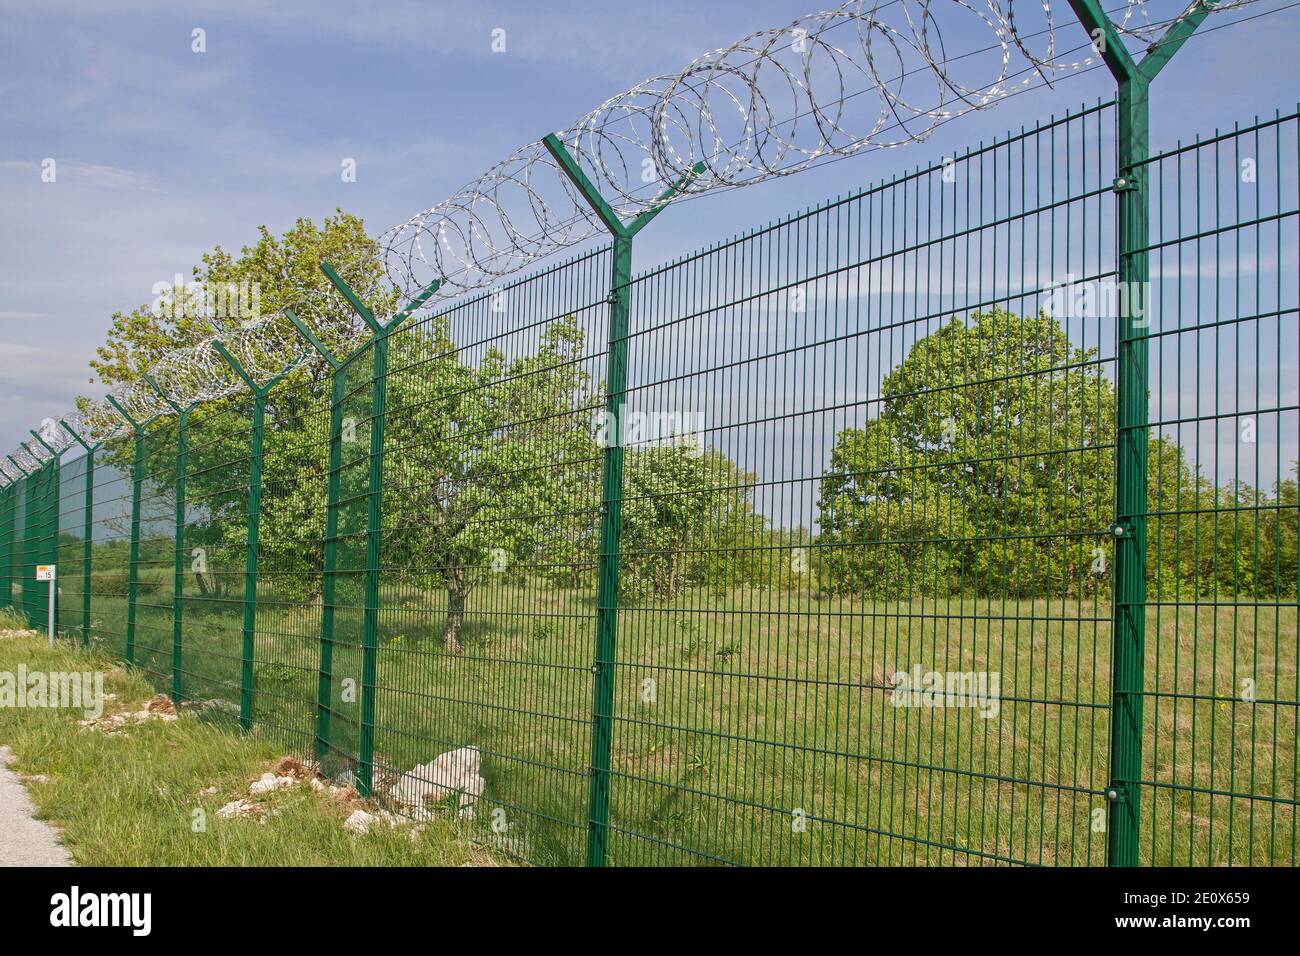 The Current Situation In Europe Meant That Countless Kilometers Of Such Fences Were Built At The National Borders To Protect Against Illegal Immigrati Stock Photo